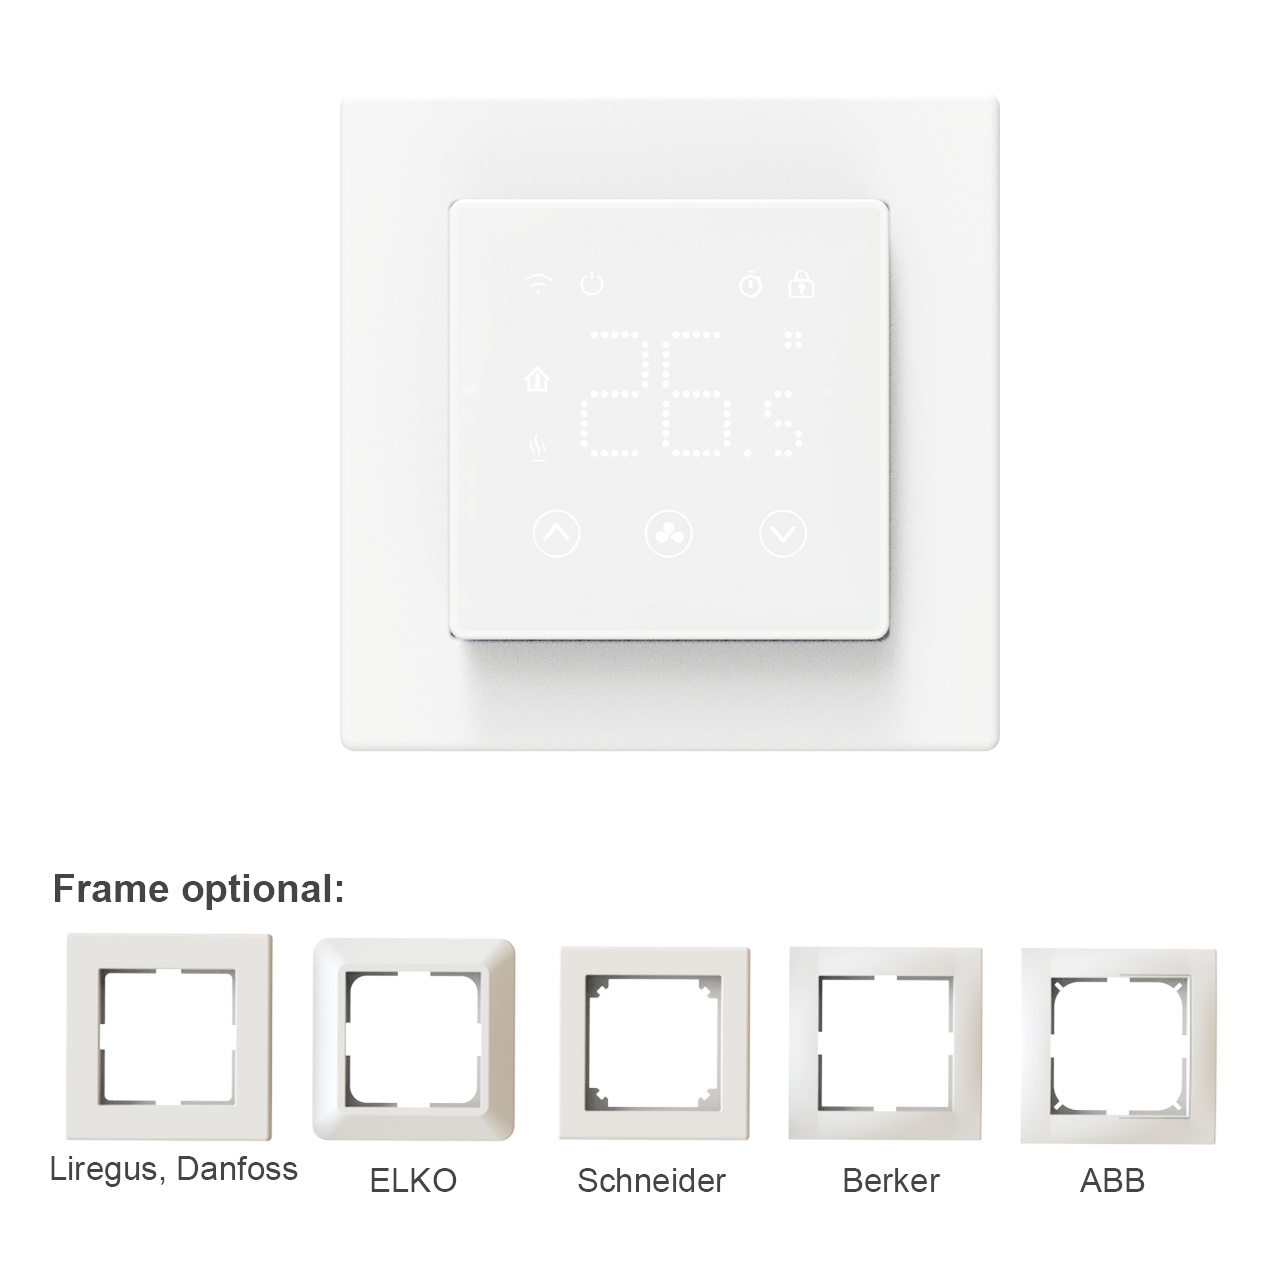 55*55mm Zigbee Wall Thermostat Suitable for Switch Frame as ABB, Schneider, Berker etc.